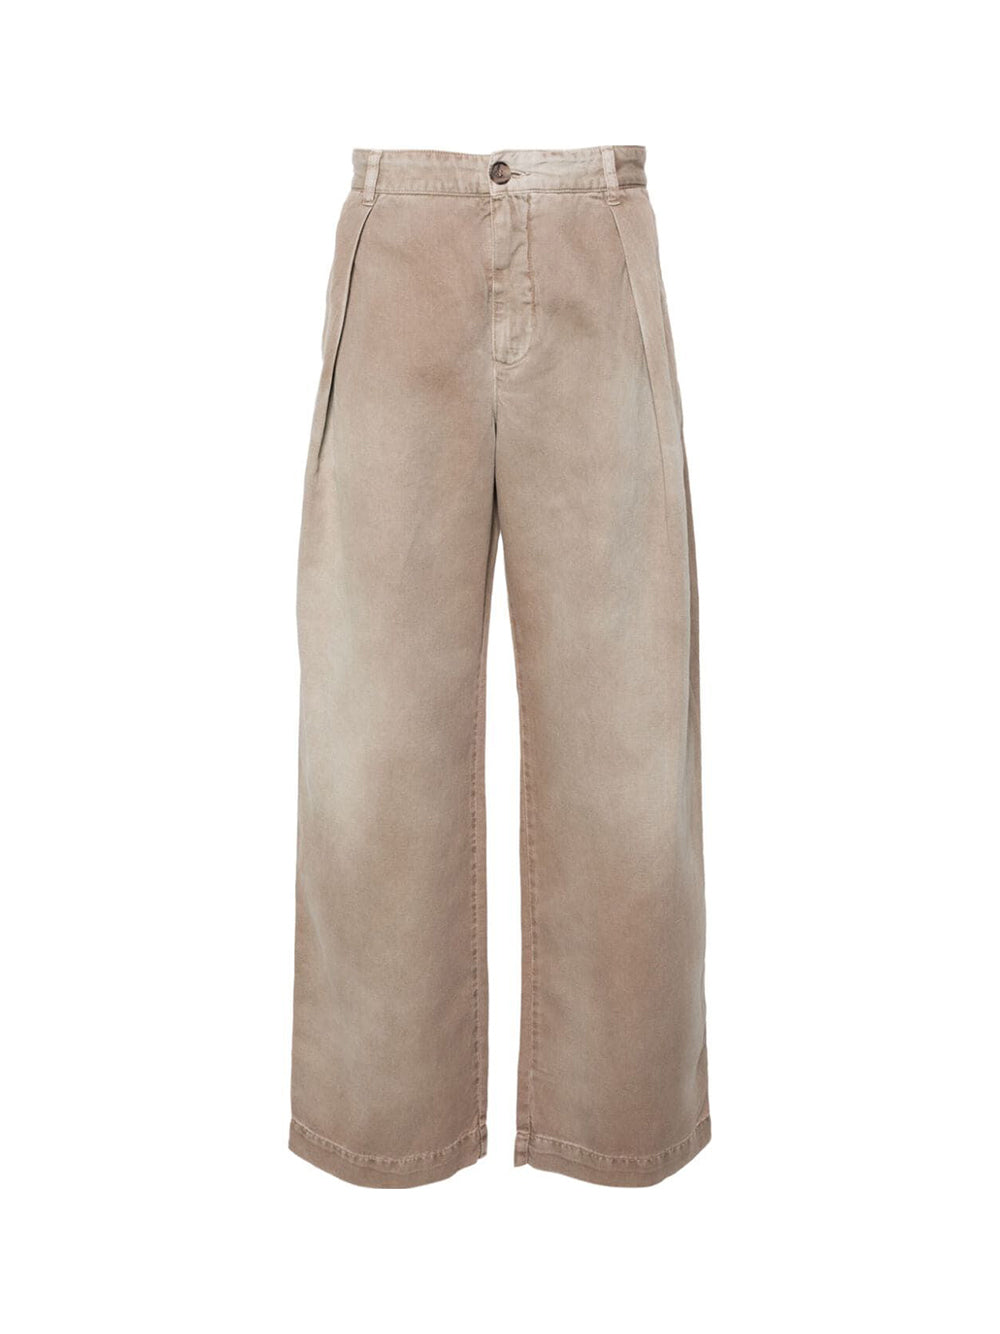 Fraser Pleated Chinos